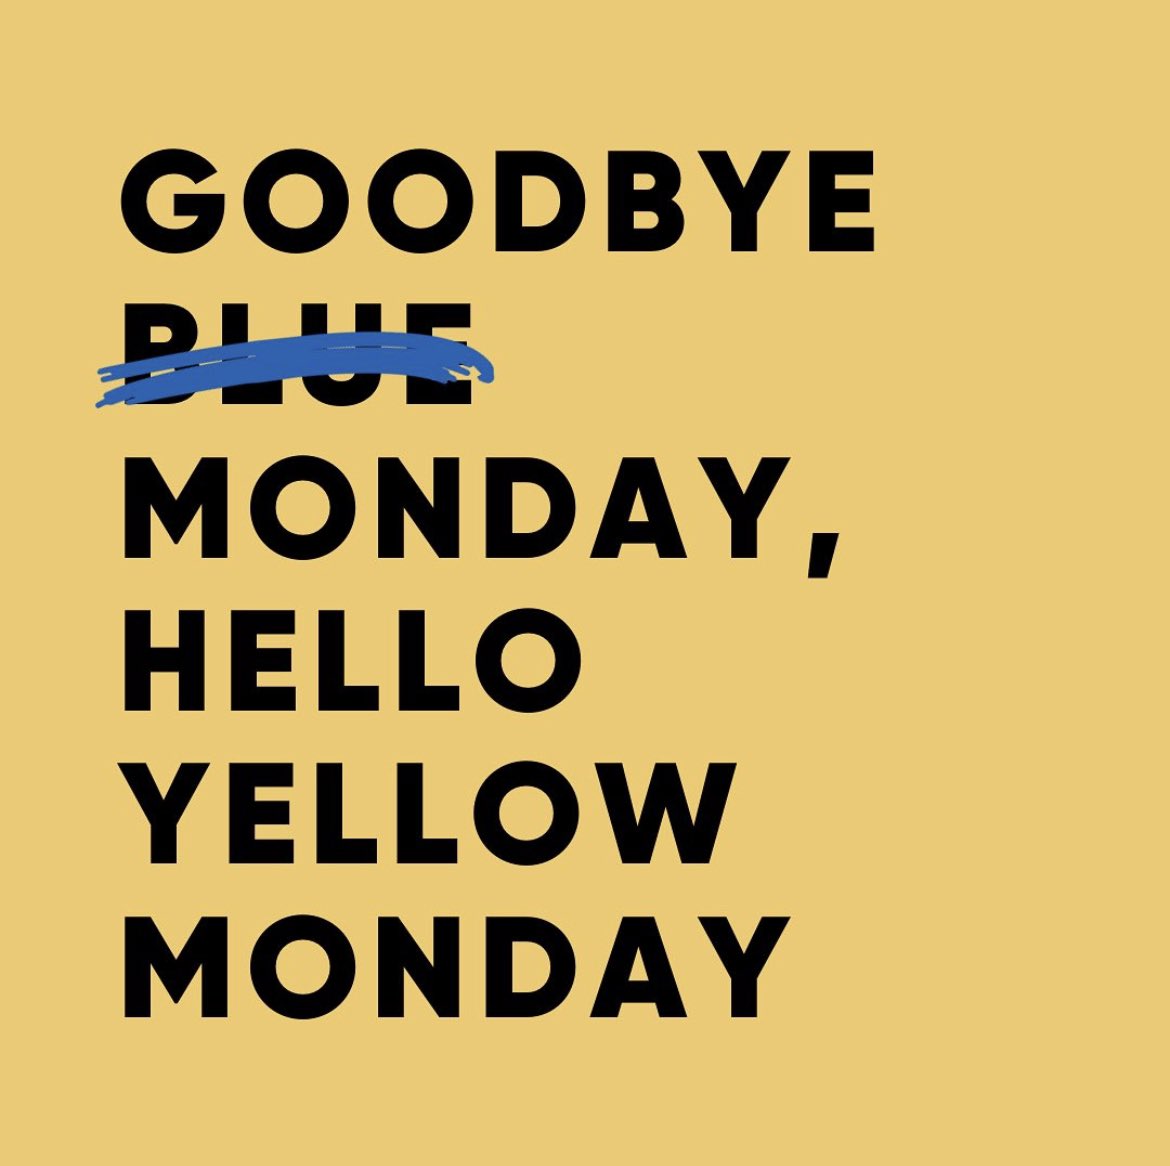 #YellowMonday is here! 👋💛 Today is ‘Blue Monday’, traditionally the most depressing day of the year - so we’re here to rid the day of January blues, with lots of free activities, mindfulness + feel good fun. Take a look → liverpoolbidcompany.com/yellow-monday/